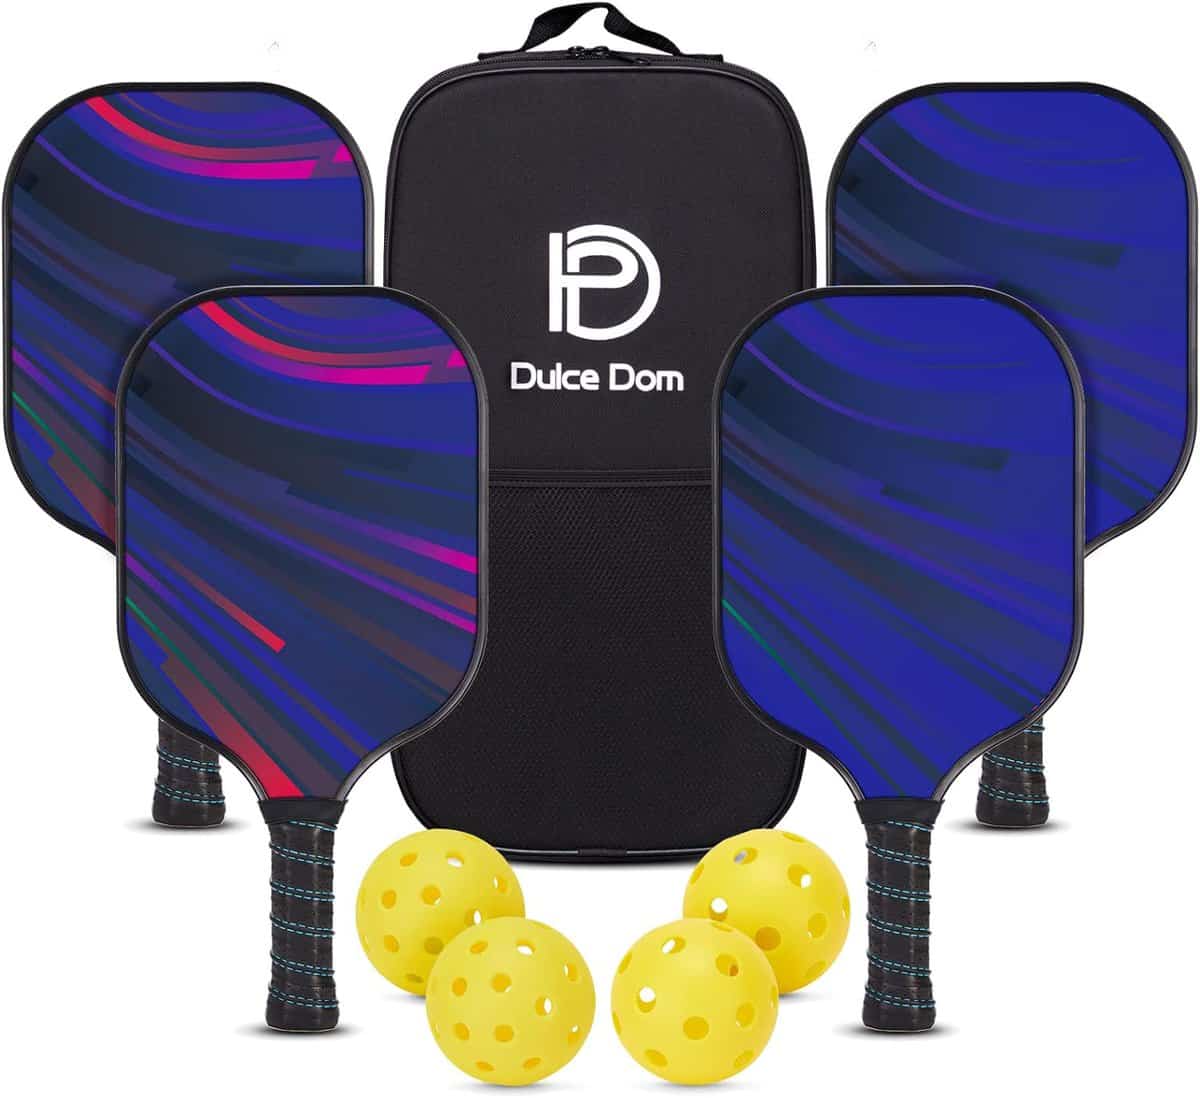 DULCE DOM Pickleball Paddles Review